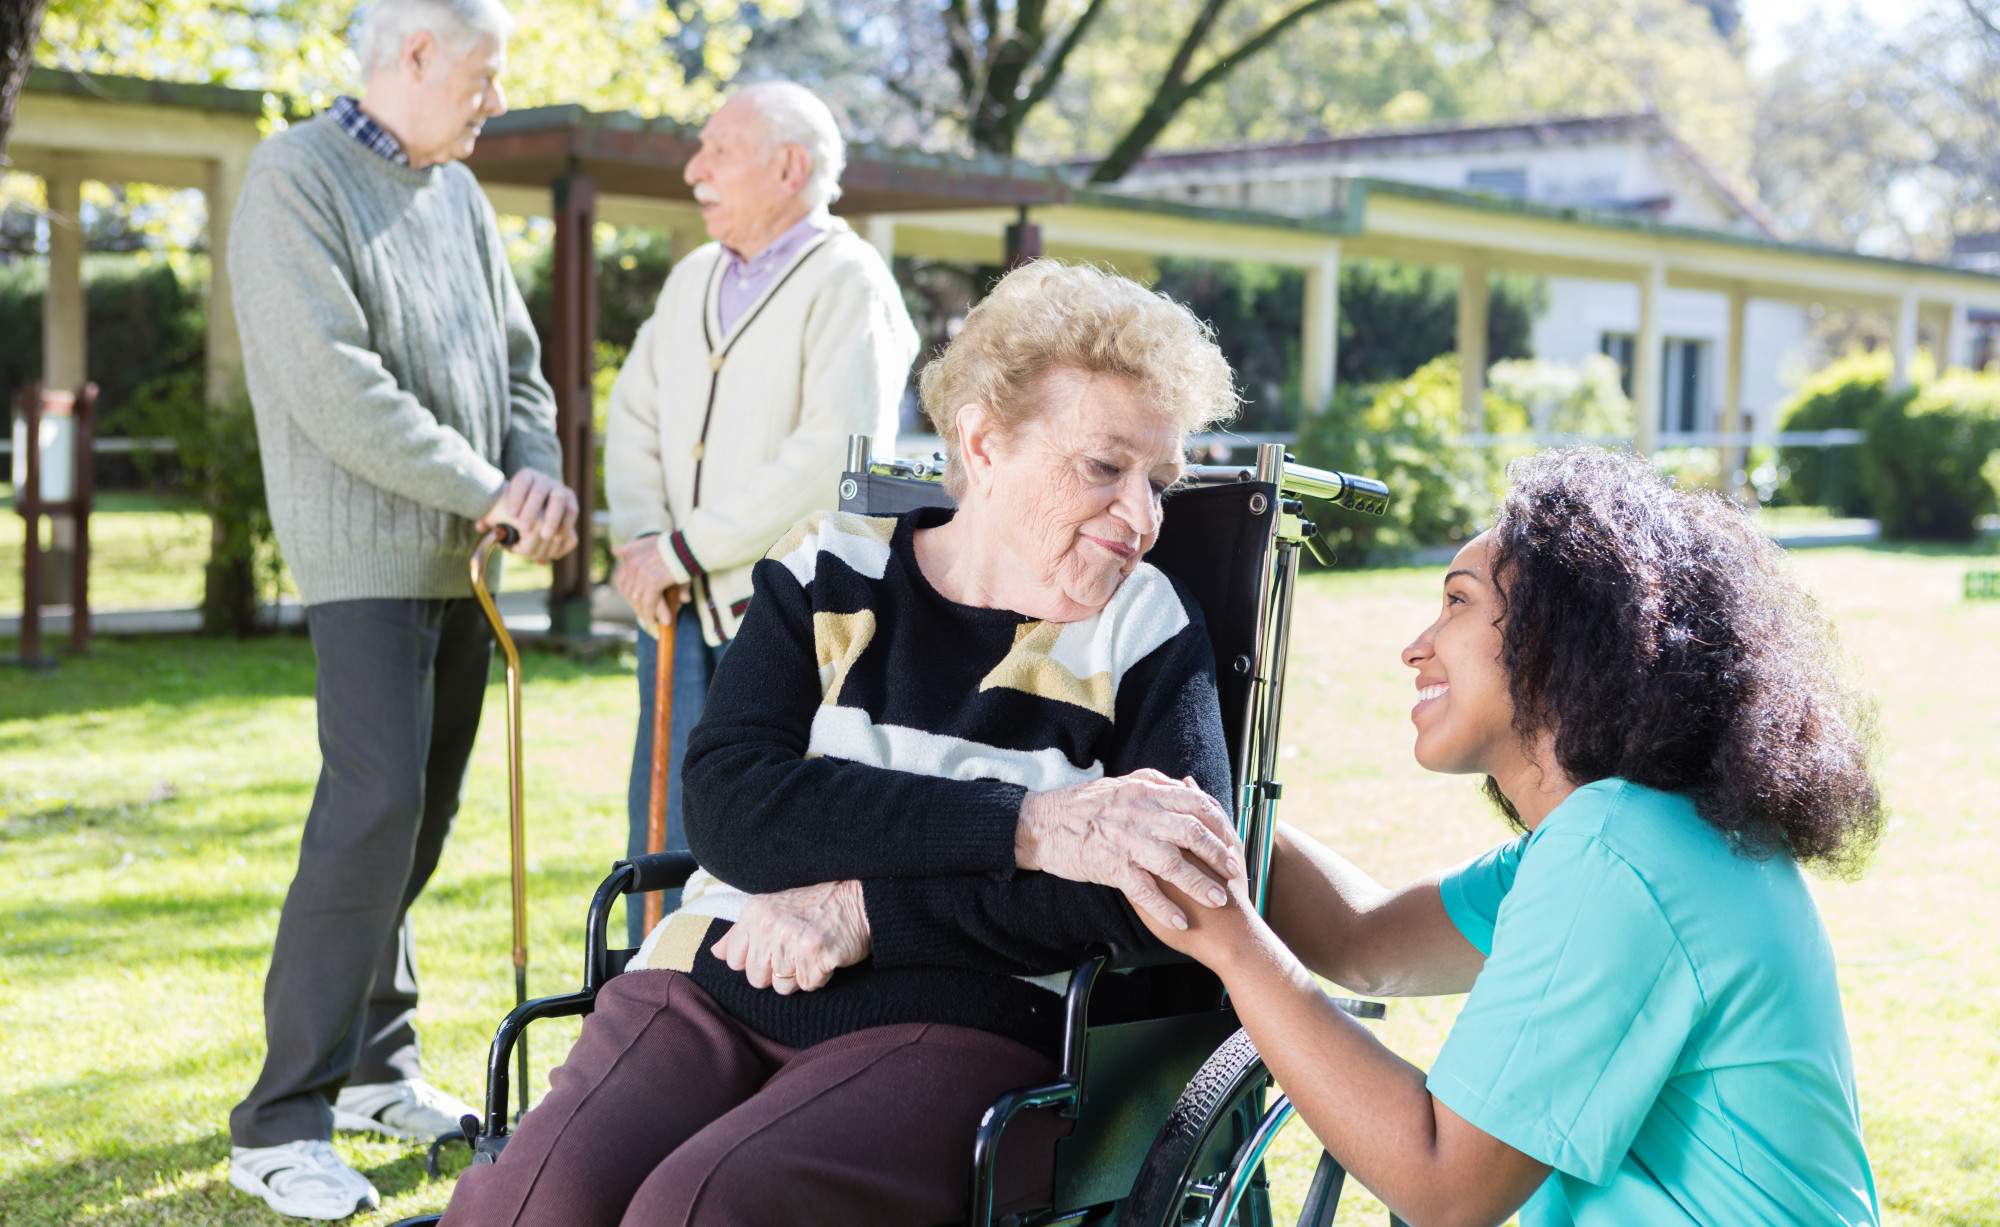 Assisted Living Facilities Near Me: Top 5 Myths About Assisted Living